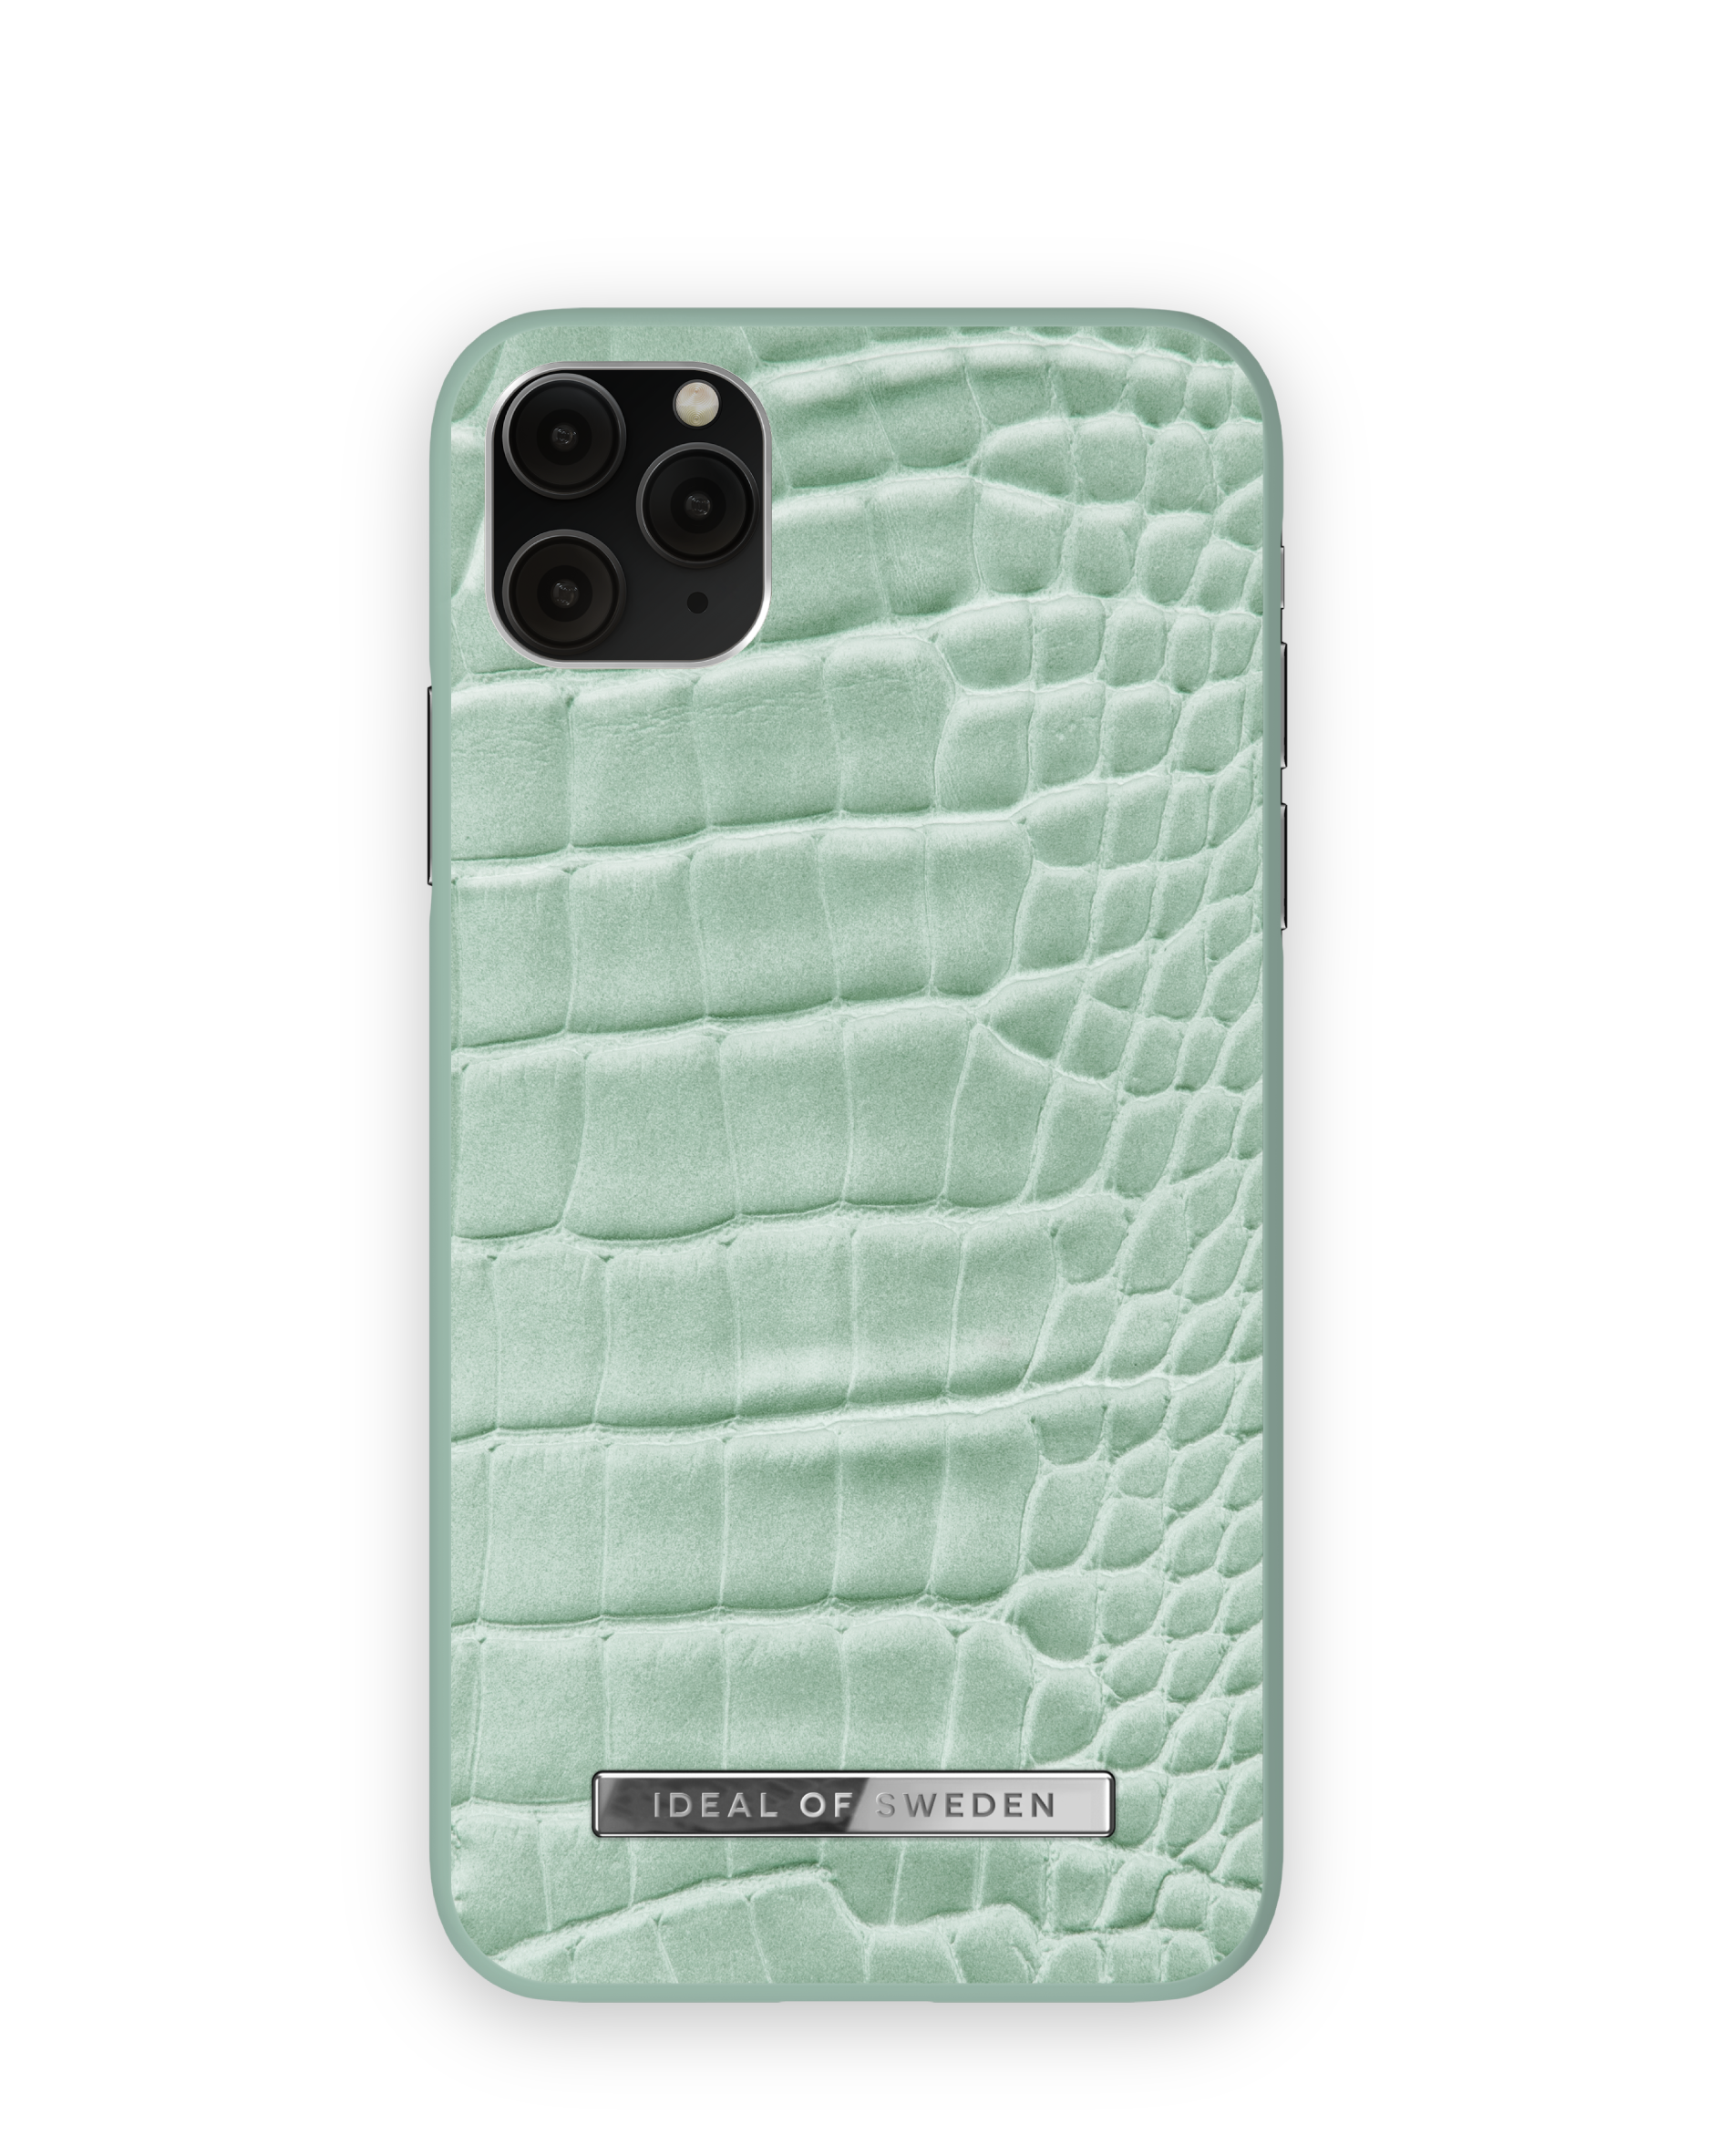 Max, Apple Apple IDPWSS21-I1965-261, IDEAL XS Apple, SWEDEN iPhone Pro Mint 11 OF iPhone Croco Max, Bookcover,